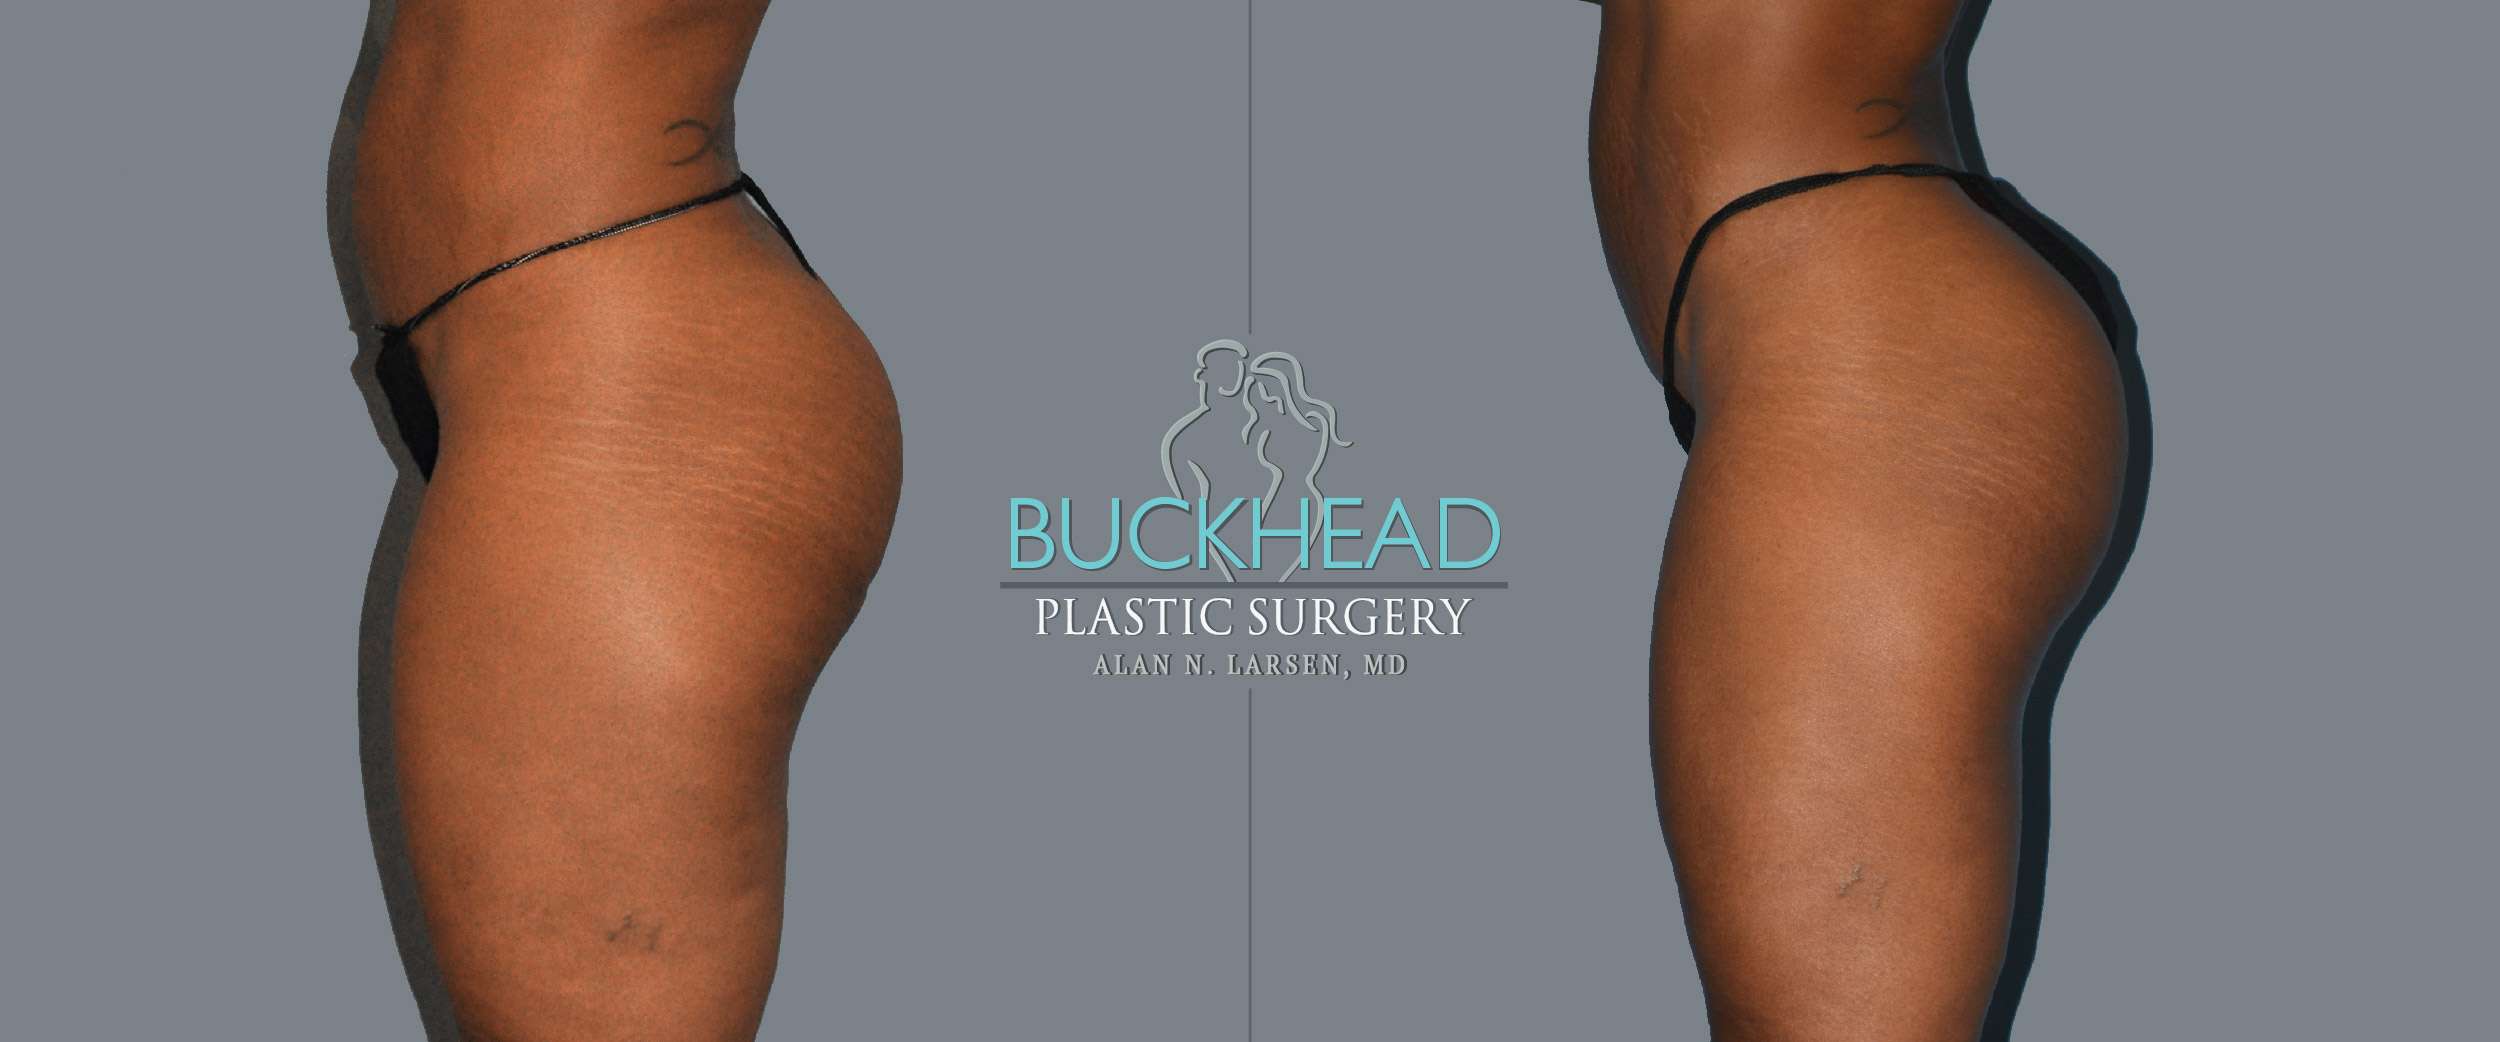 Before and After Photo Gallery | Liposuction - Thigh Front | Buckhead Plastic Surgery | Alan N. Larsen, MD | Board-Certified Plastic Surgeon | Atlanta GA